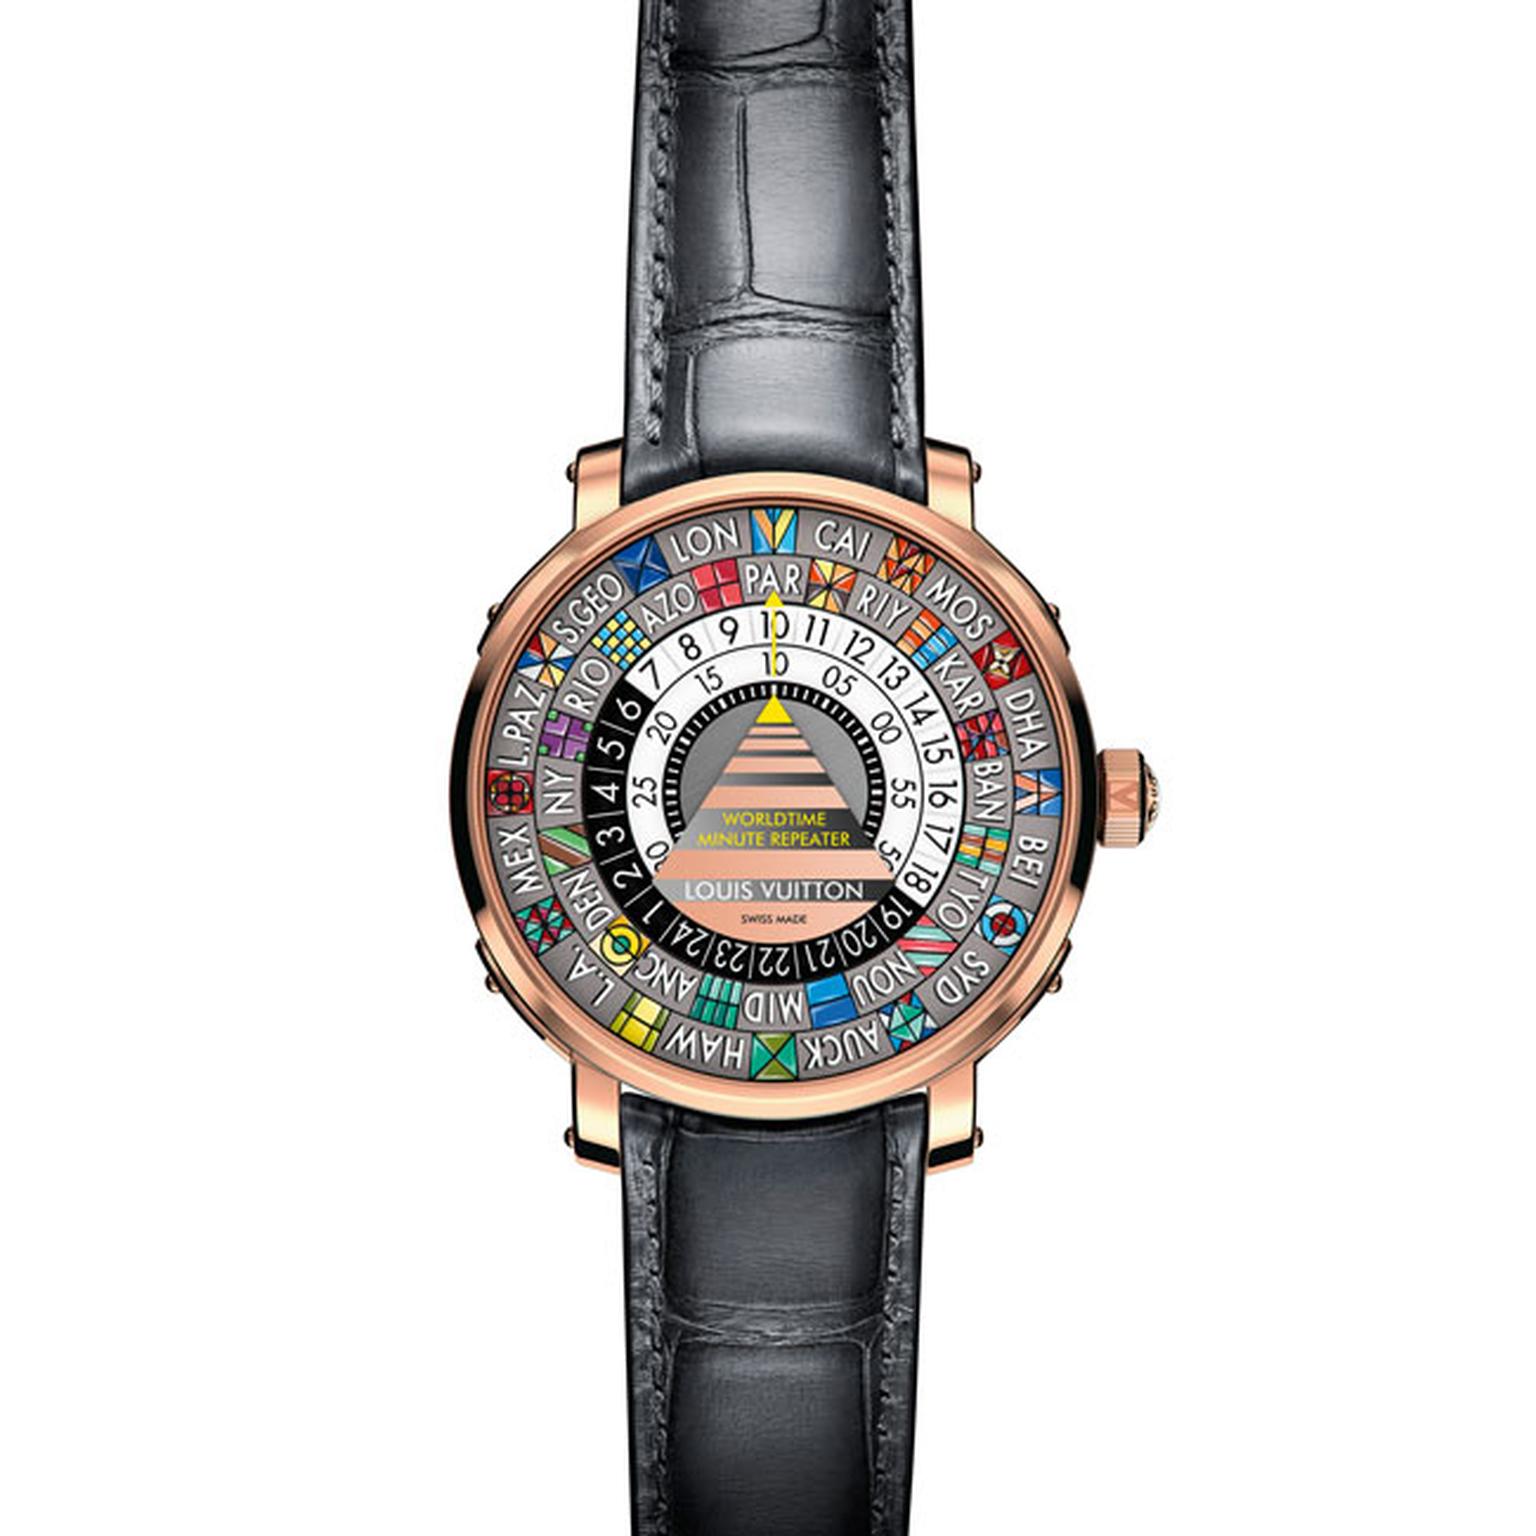 Louis Vuitton Worldtime Minute Repeater watch_main